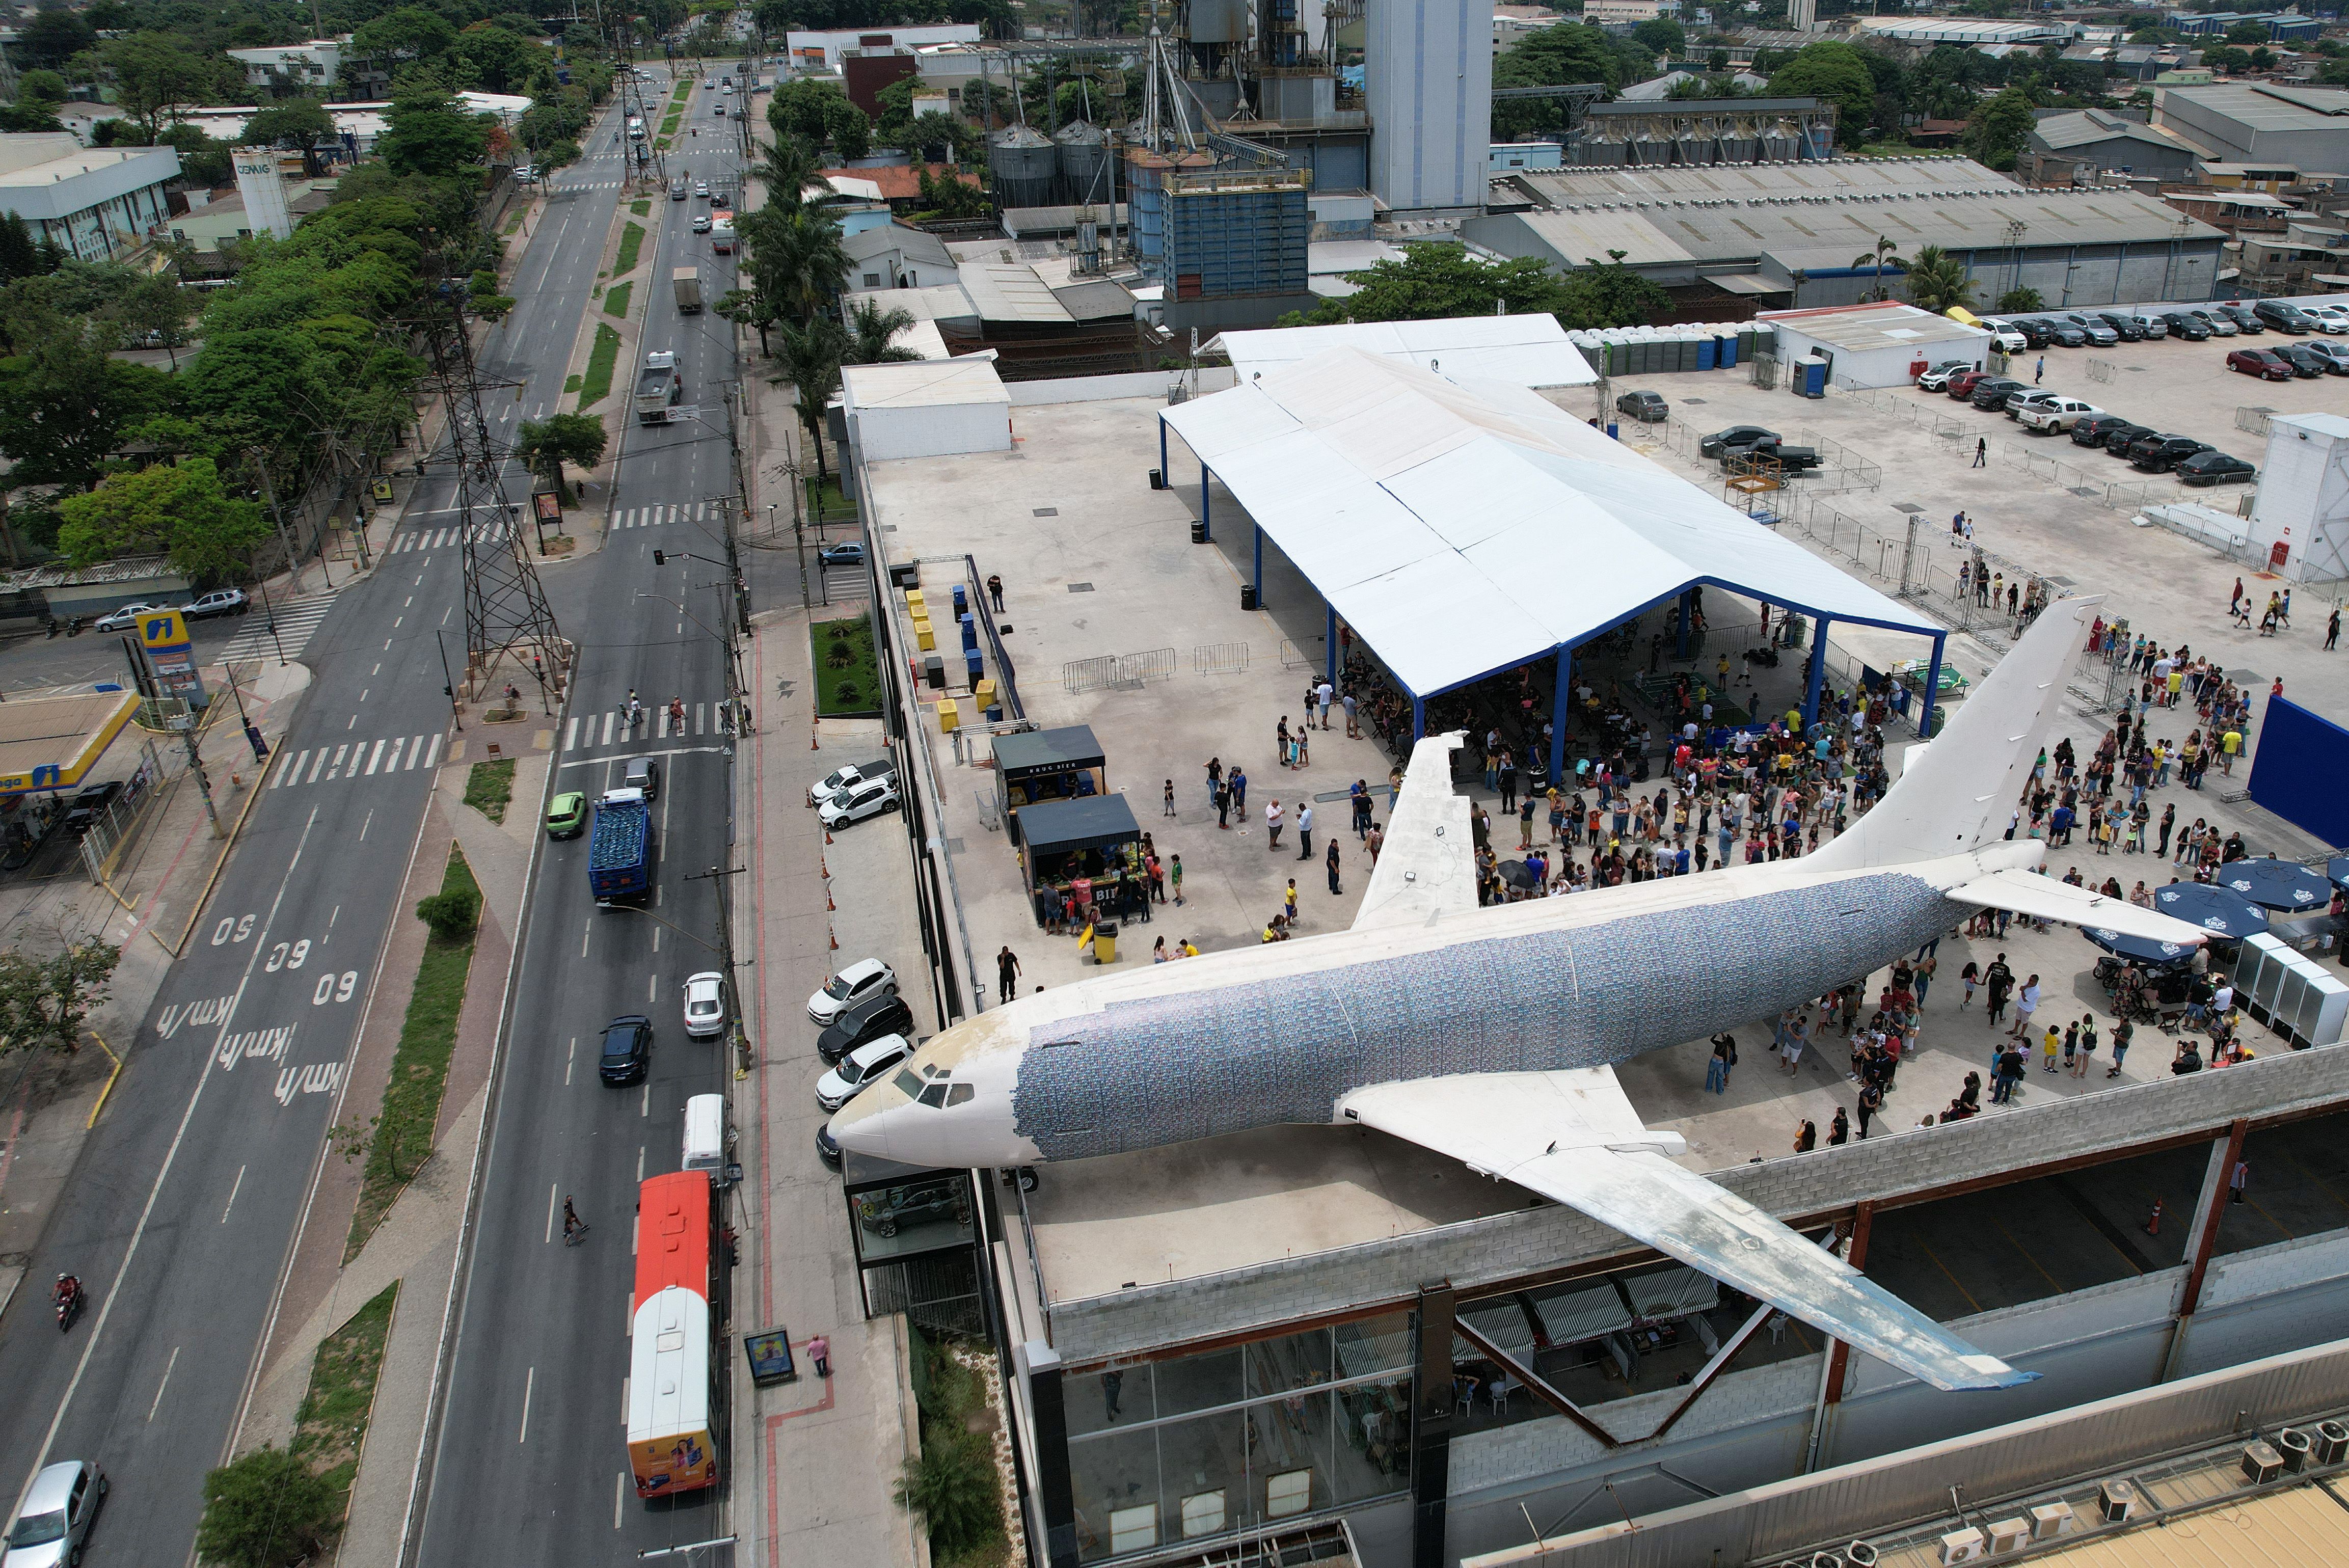 Fans put on football stickers to a 737 on the roof of a shopping mall in Contagem, Minas Gerais state, Brazil